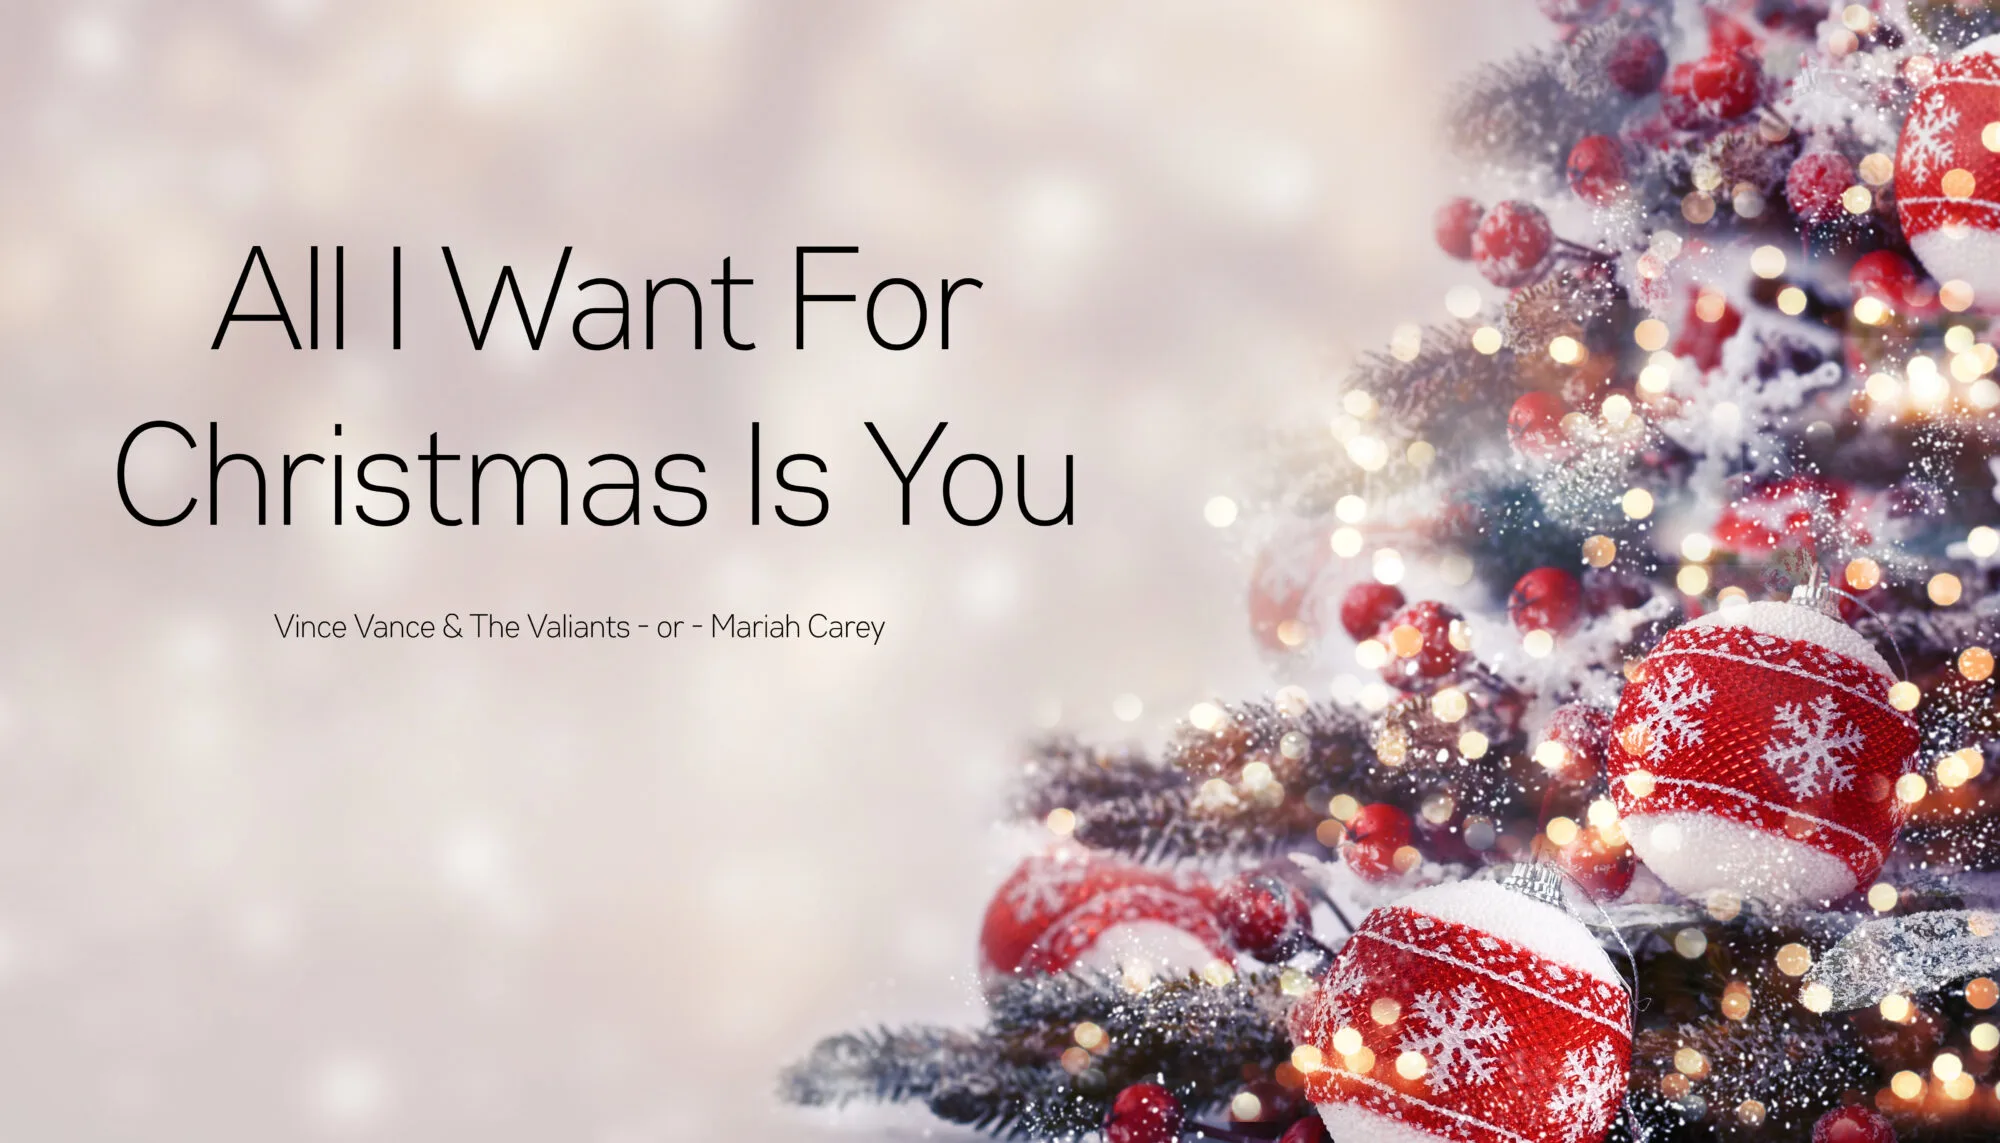 All I Want for Christmas Is You (Vince Vance & the Valiants song